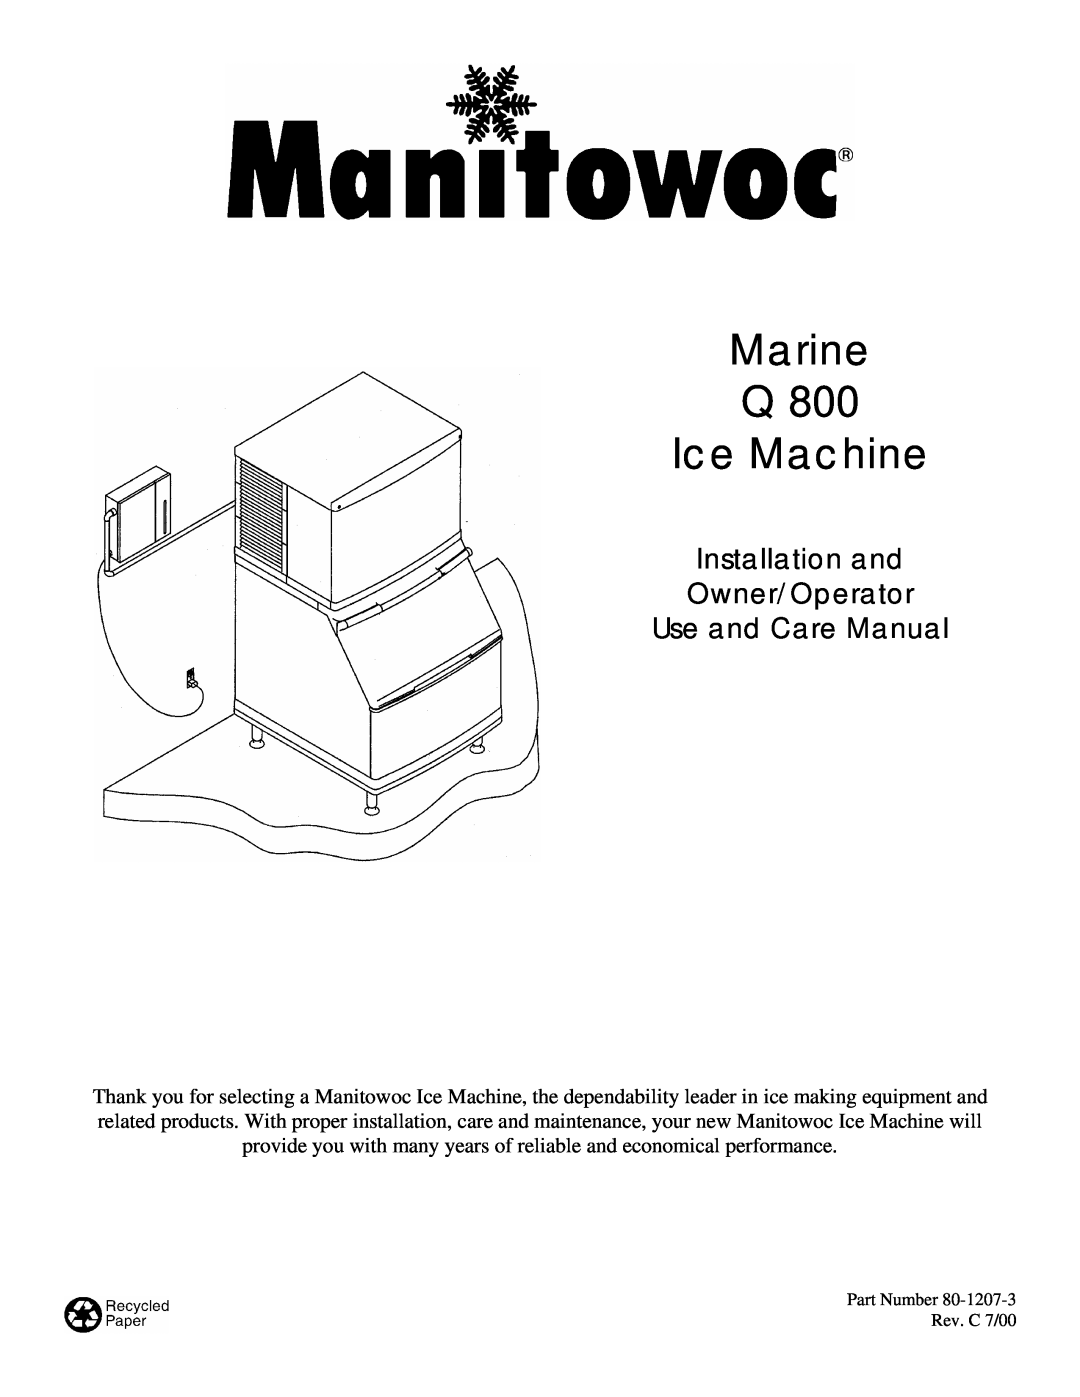 Manitowoc Ice Q 800 manual Installation and Owner/Operator, Use and Care Manual, Marine Q Ice Machine 